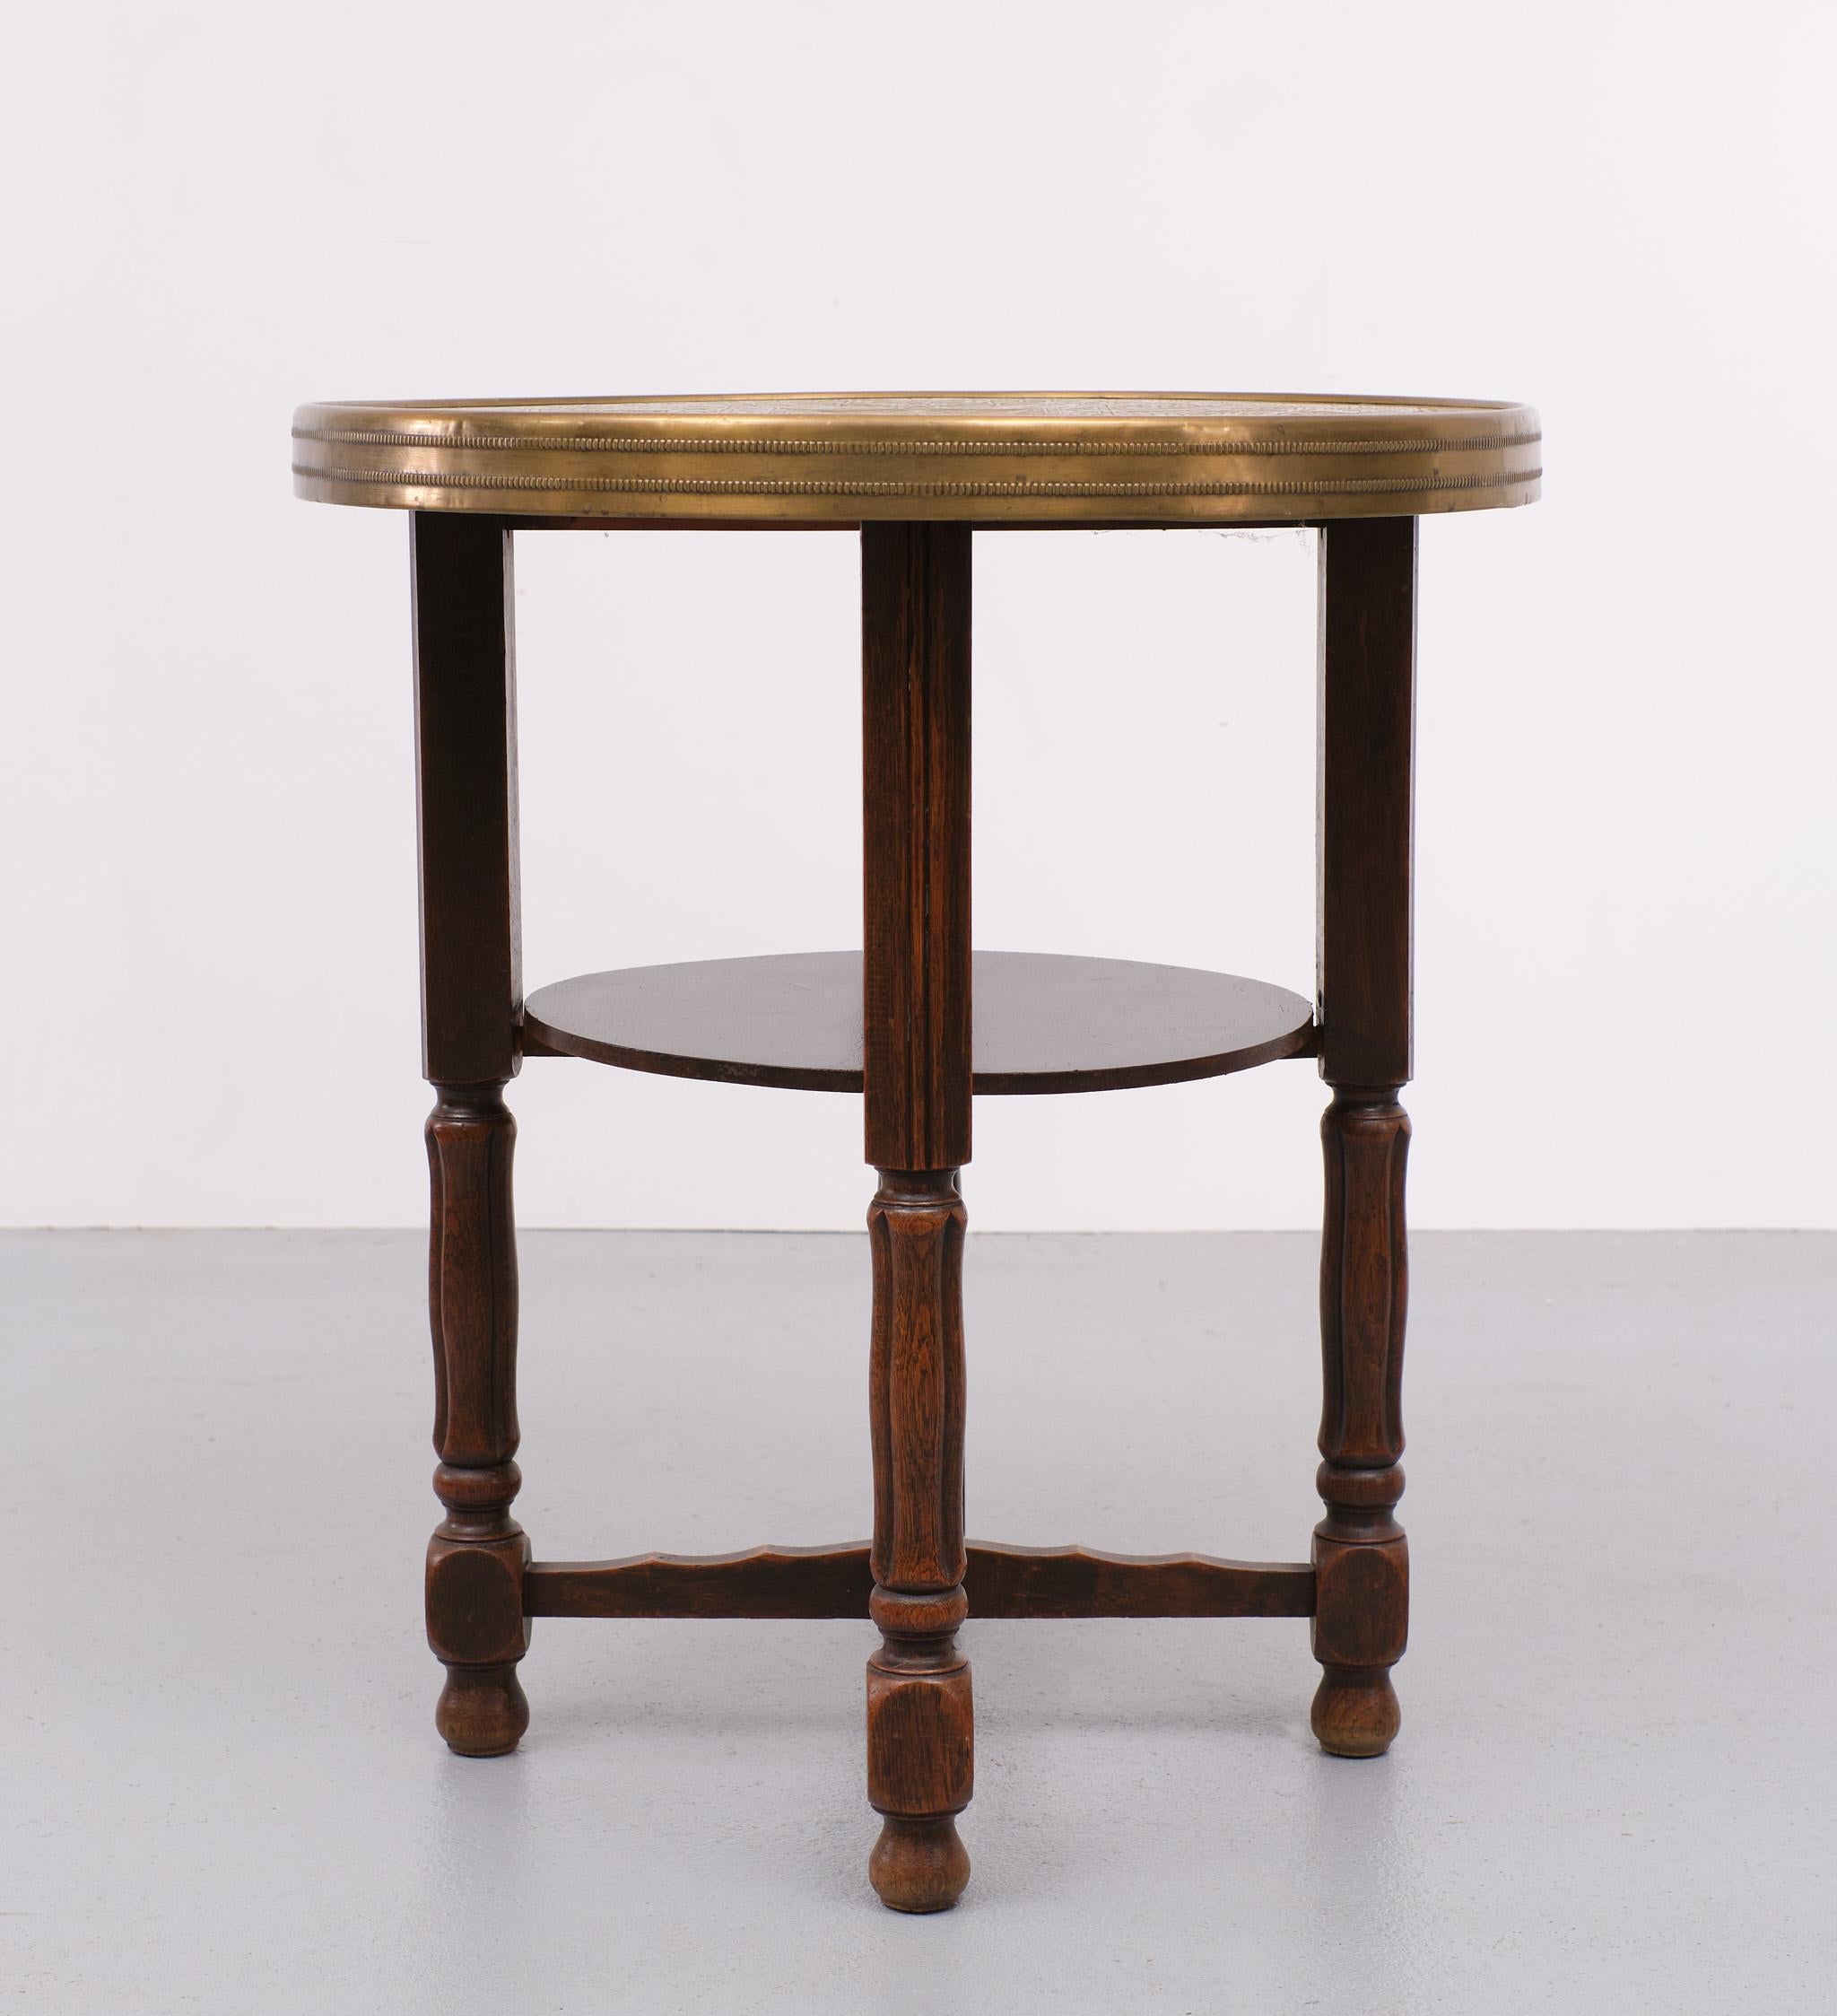 Dutch Art Deco Smoking Table 1930s Holland For Sale